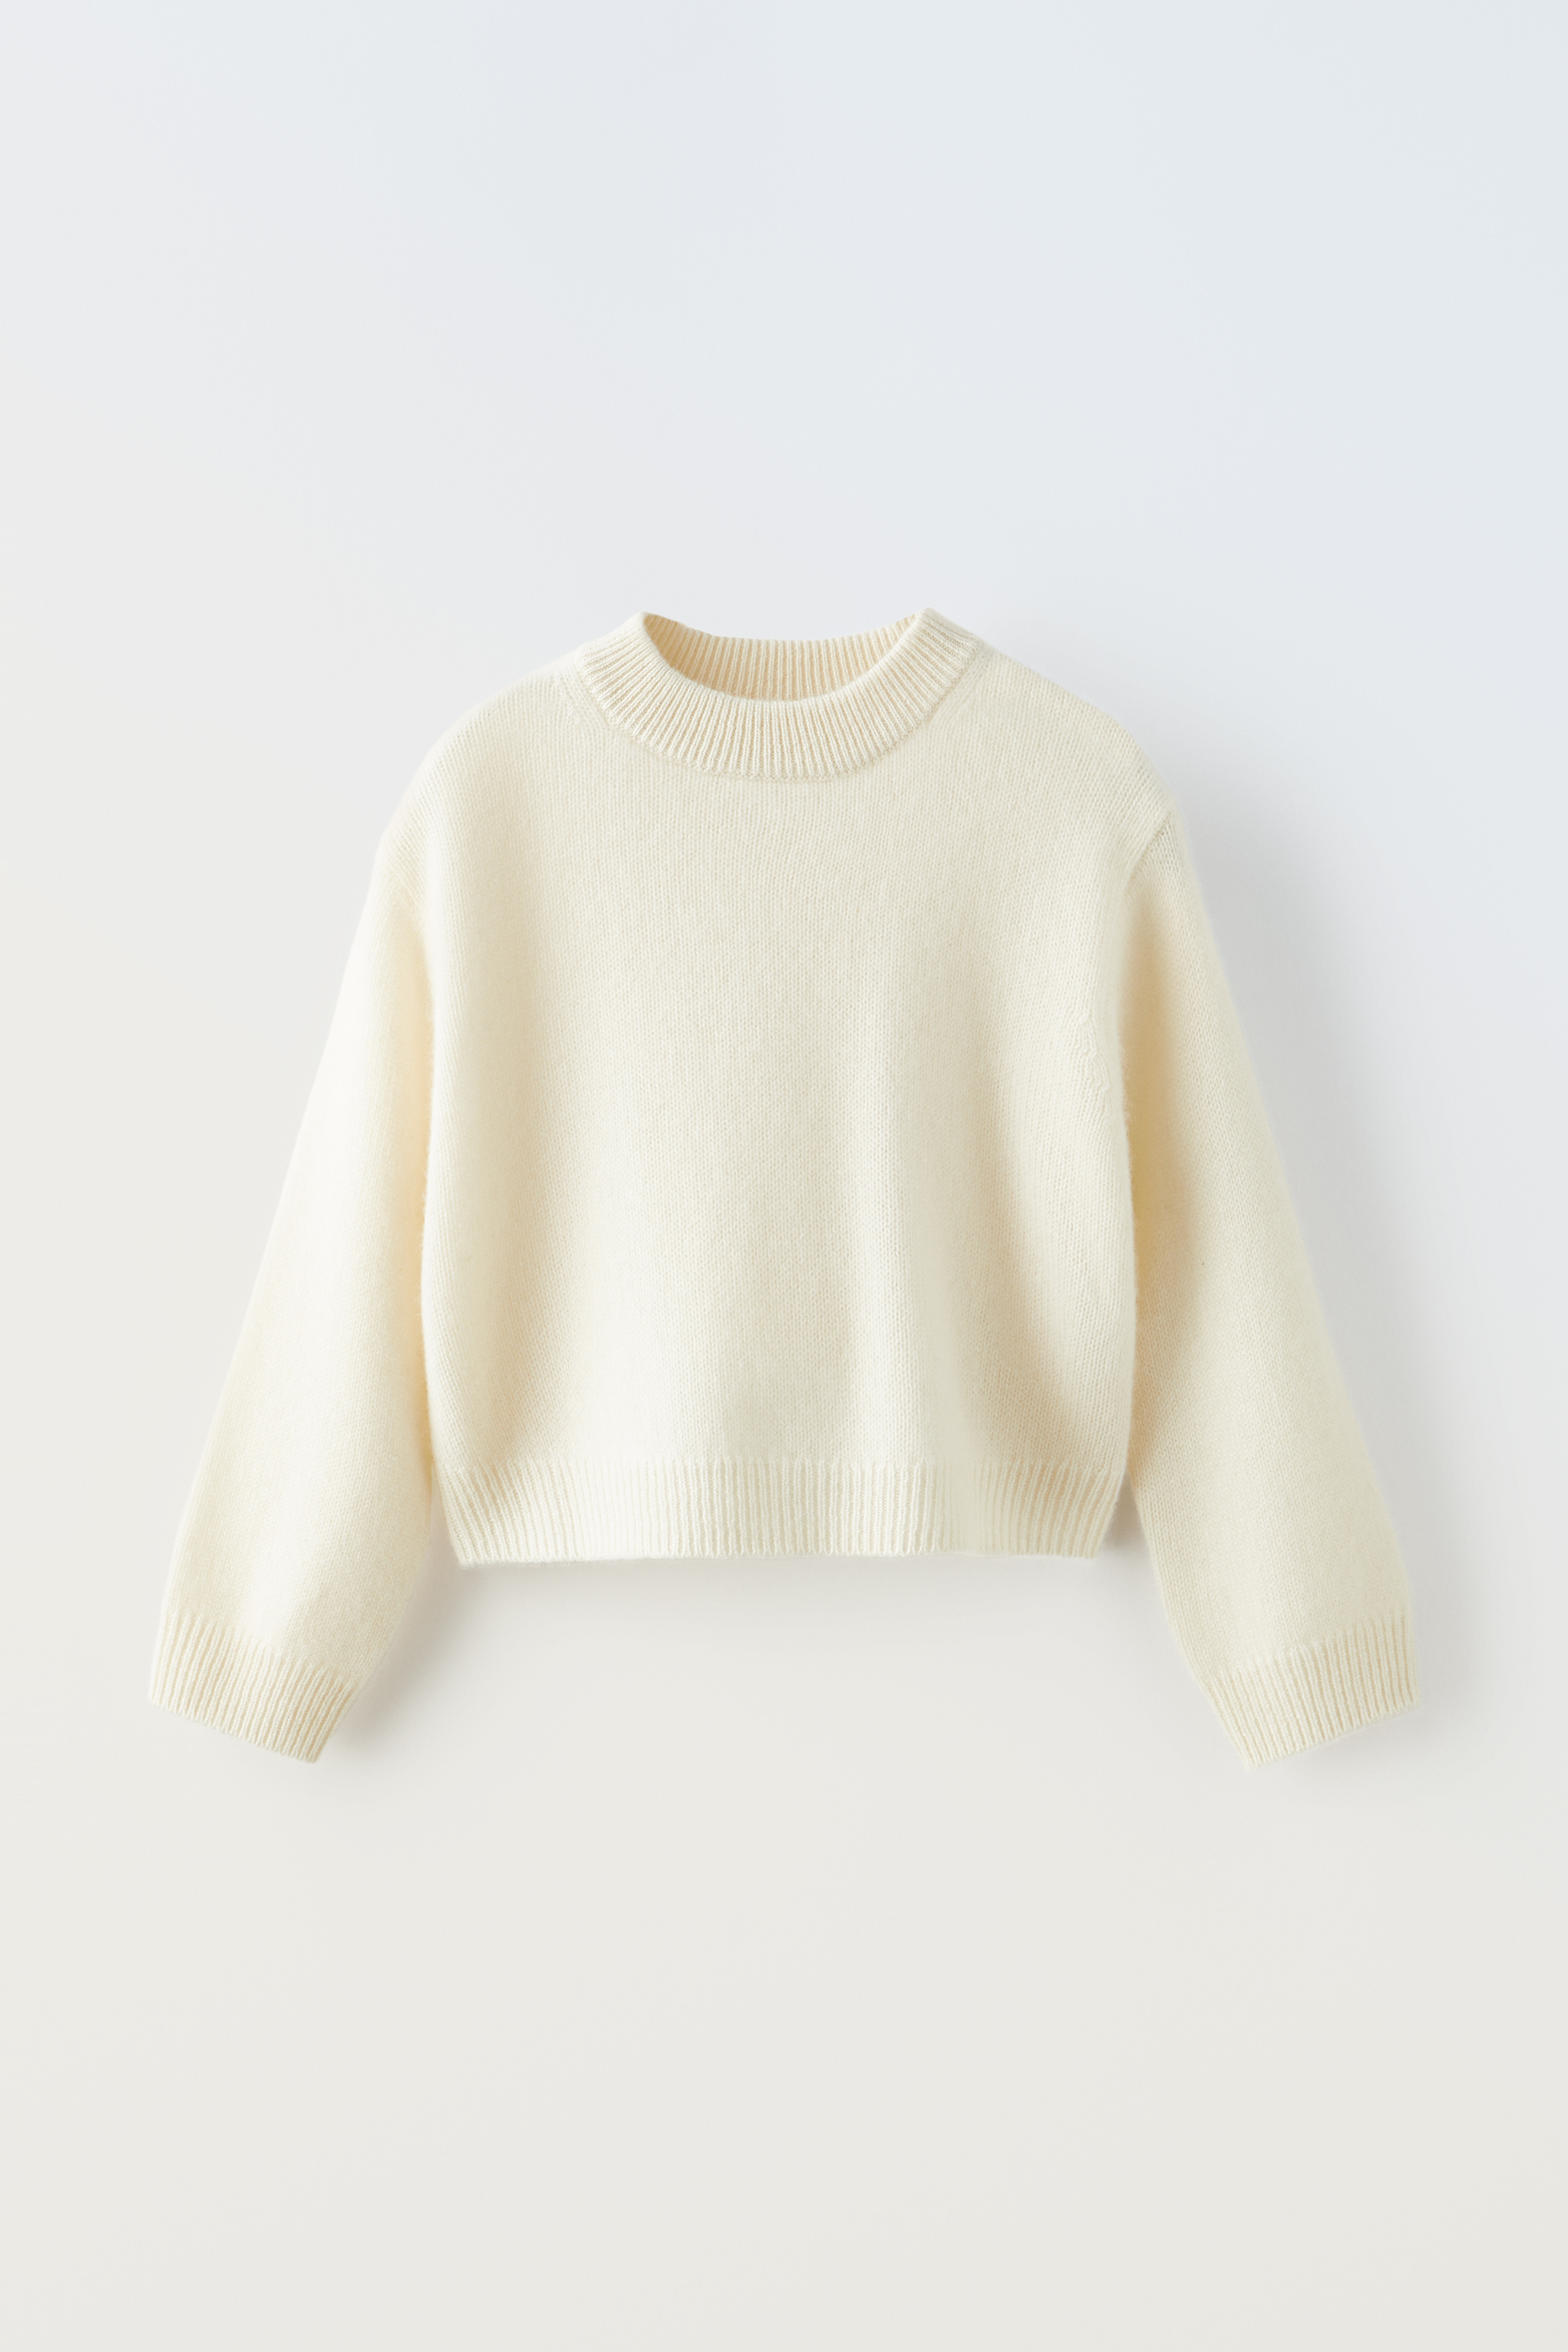 100% CASHMERE KNIT SWEATER LIMITED EDITION